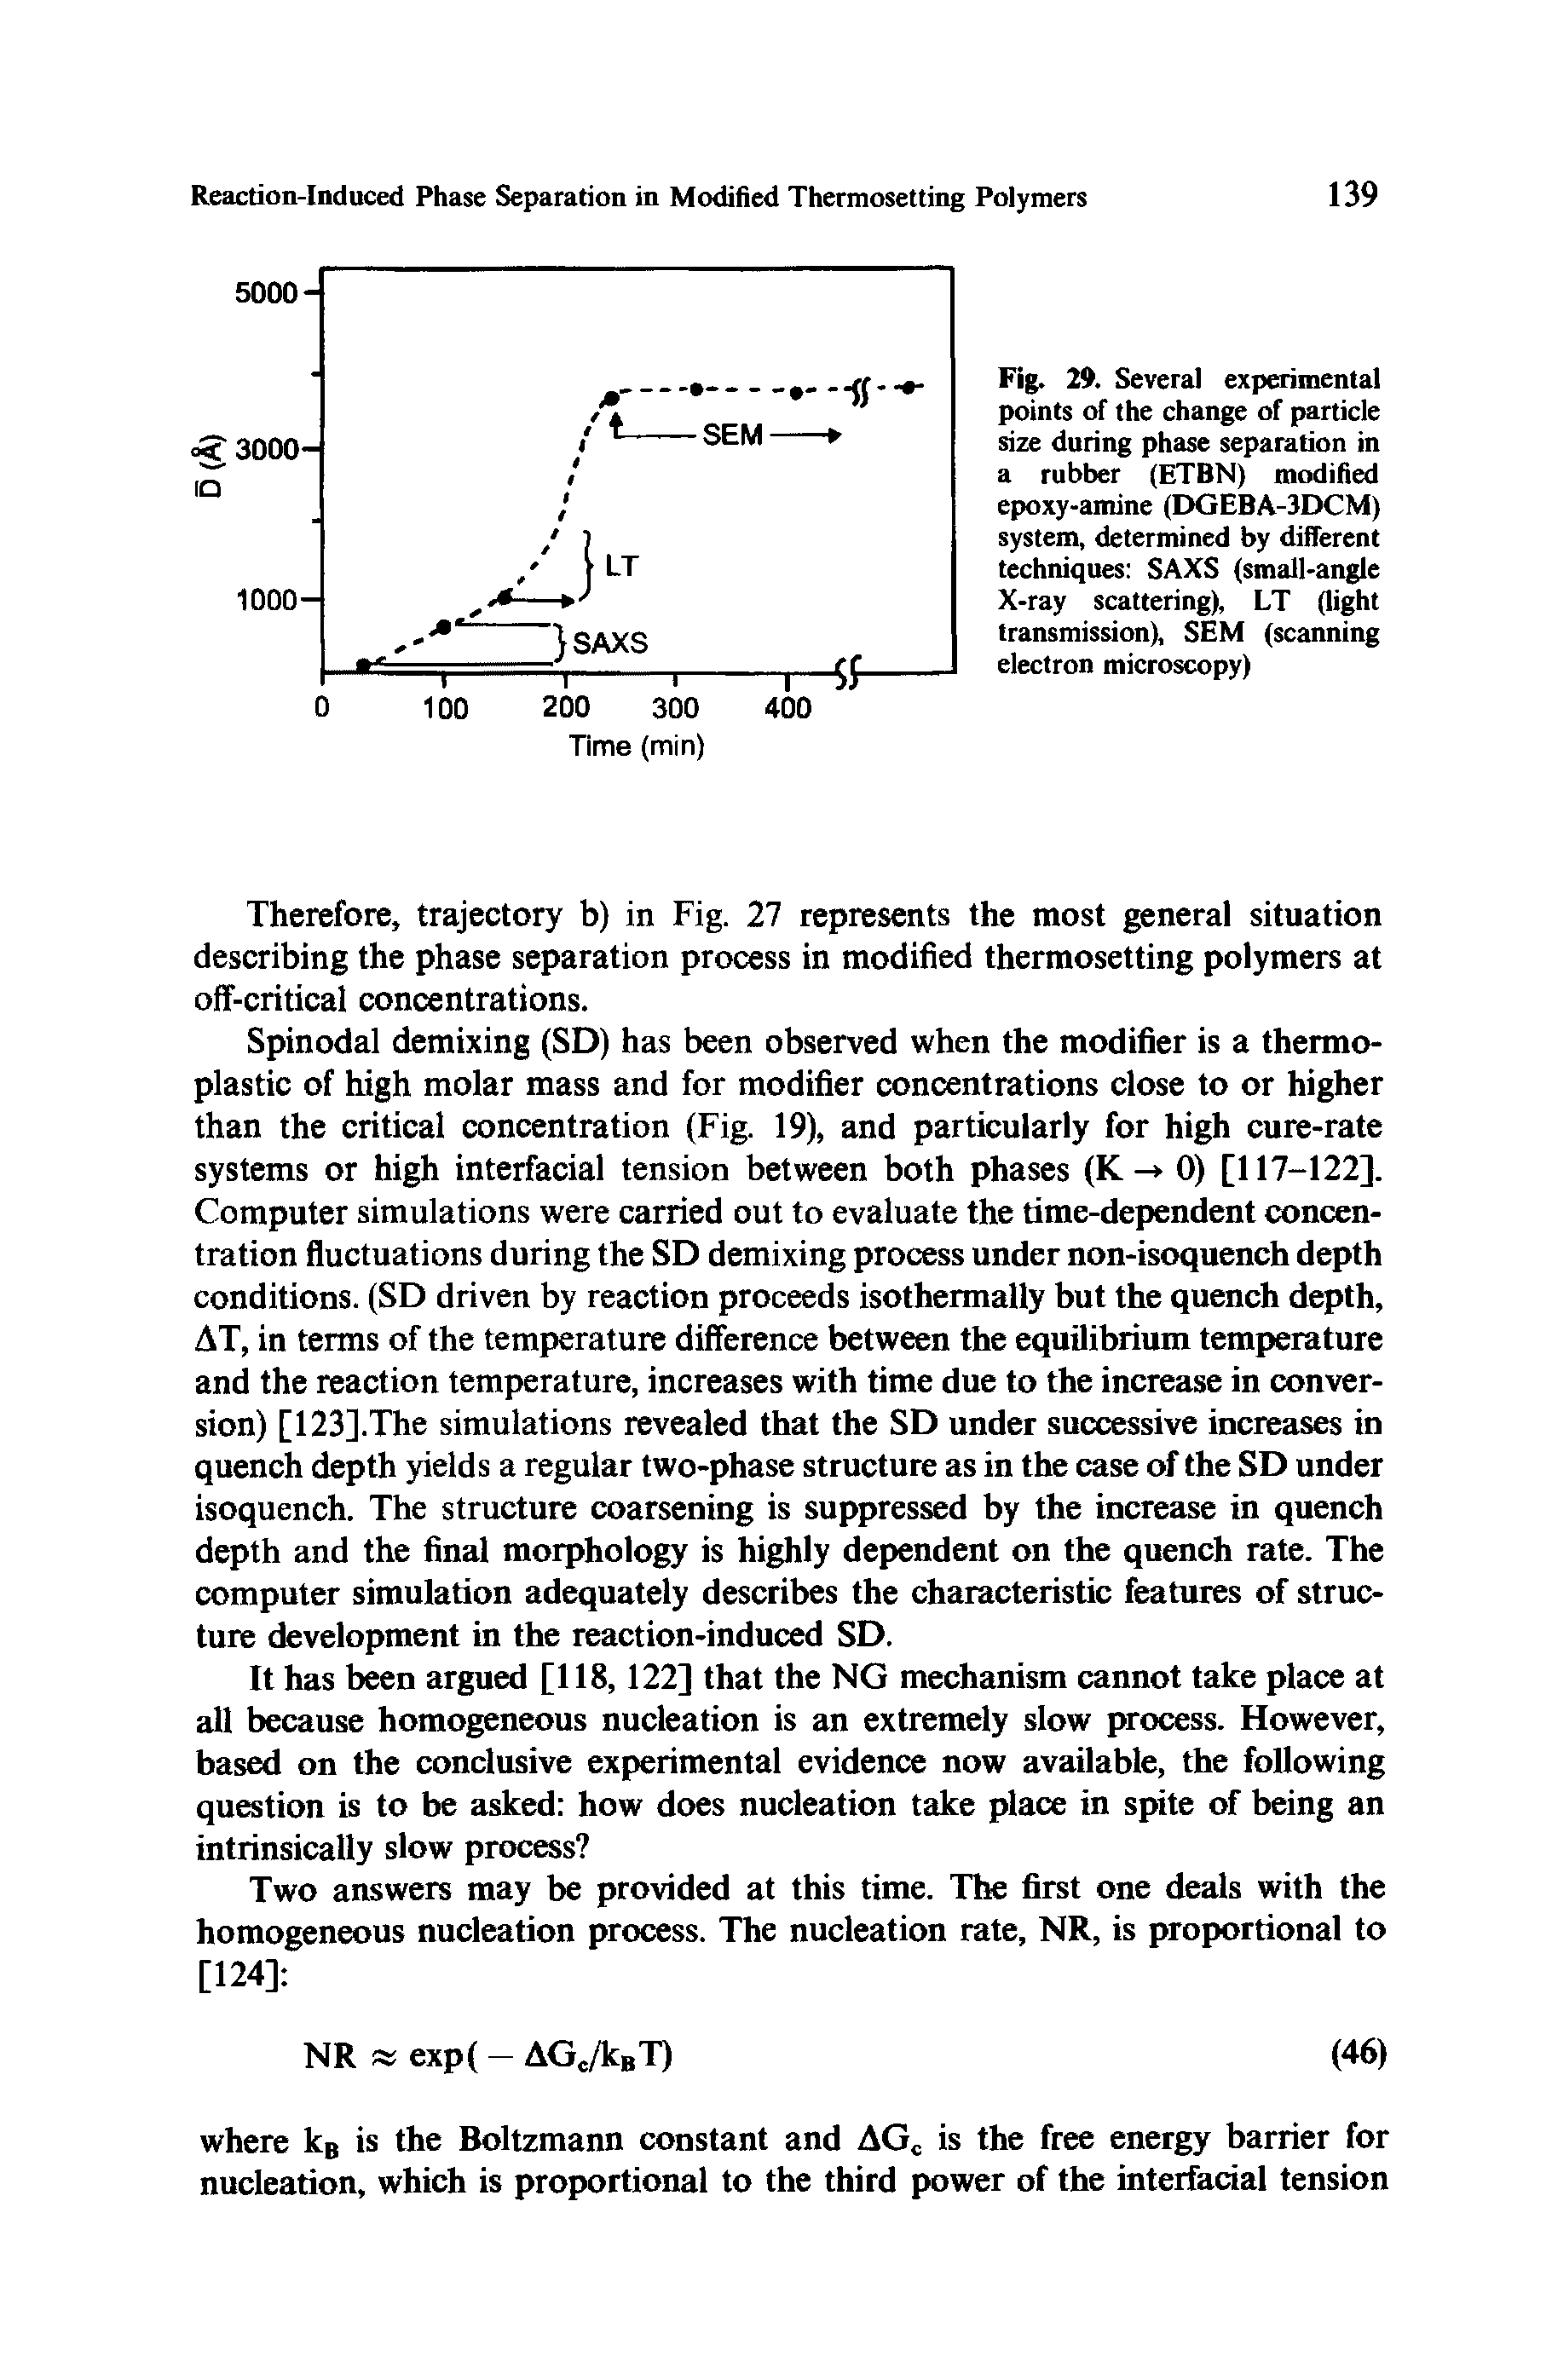 Fig. 29. Several experimental points of the change of particle size during phase separation in a rubber (ETBN) modified epoxy-amine (DGEBA-3DCM) system, determined by different techniques SAXS (small-angle X-ray scattering), LT (light transmission), SEM (scanning electron microscopy)...